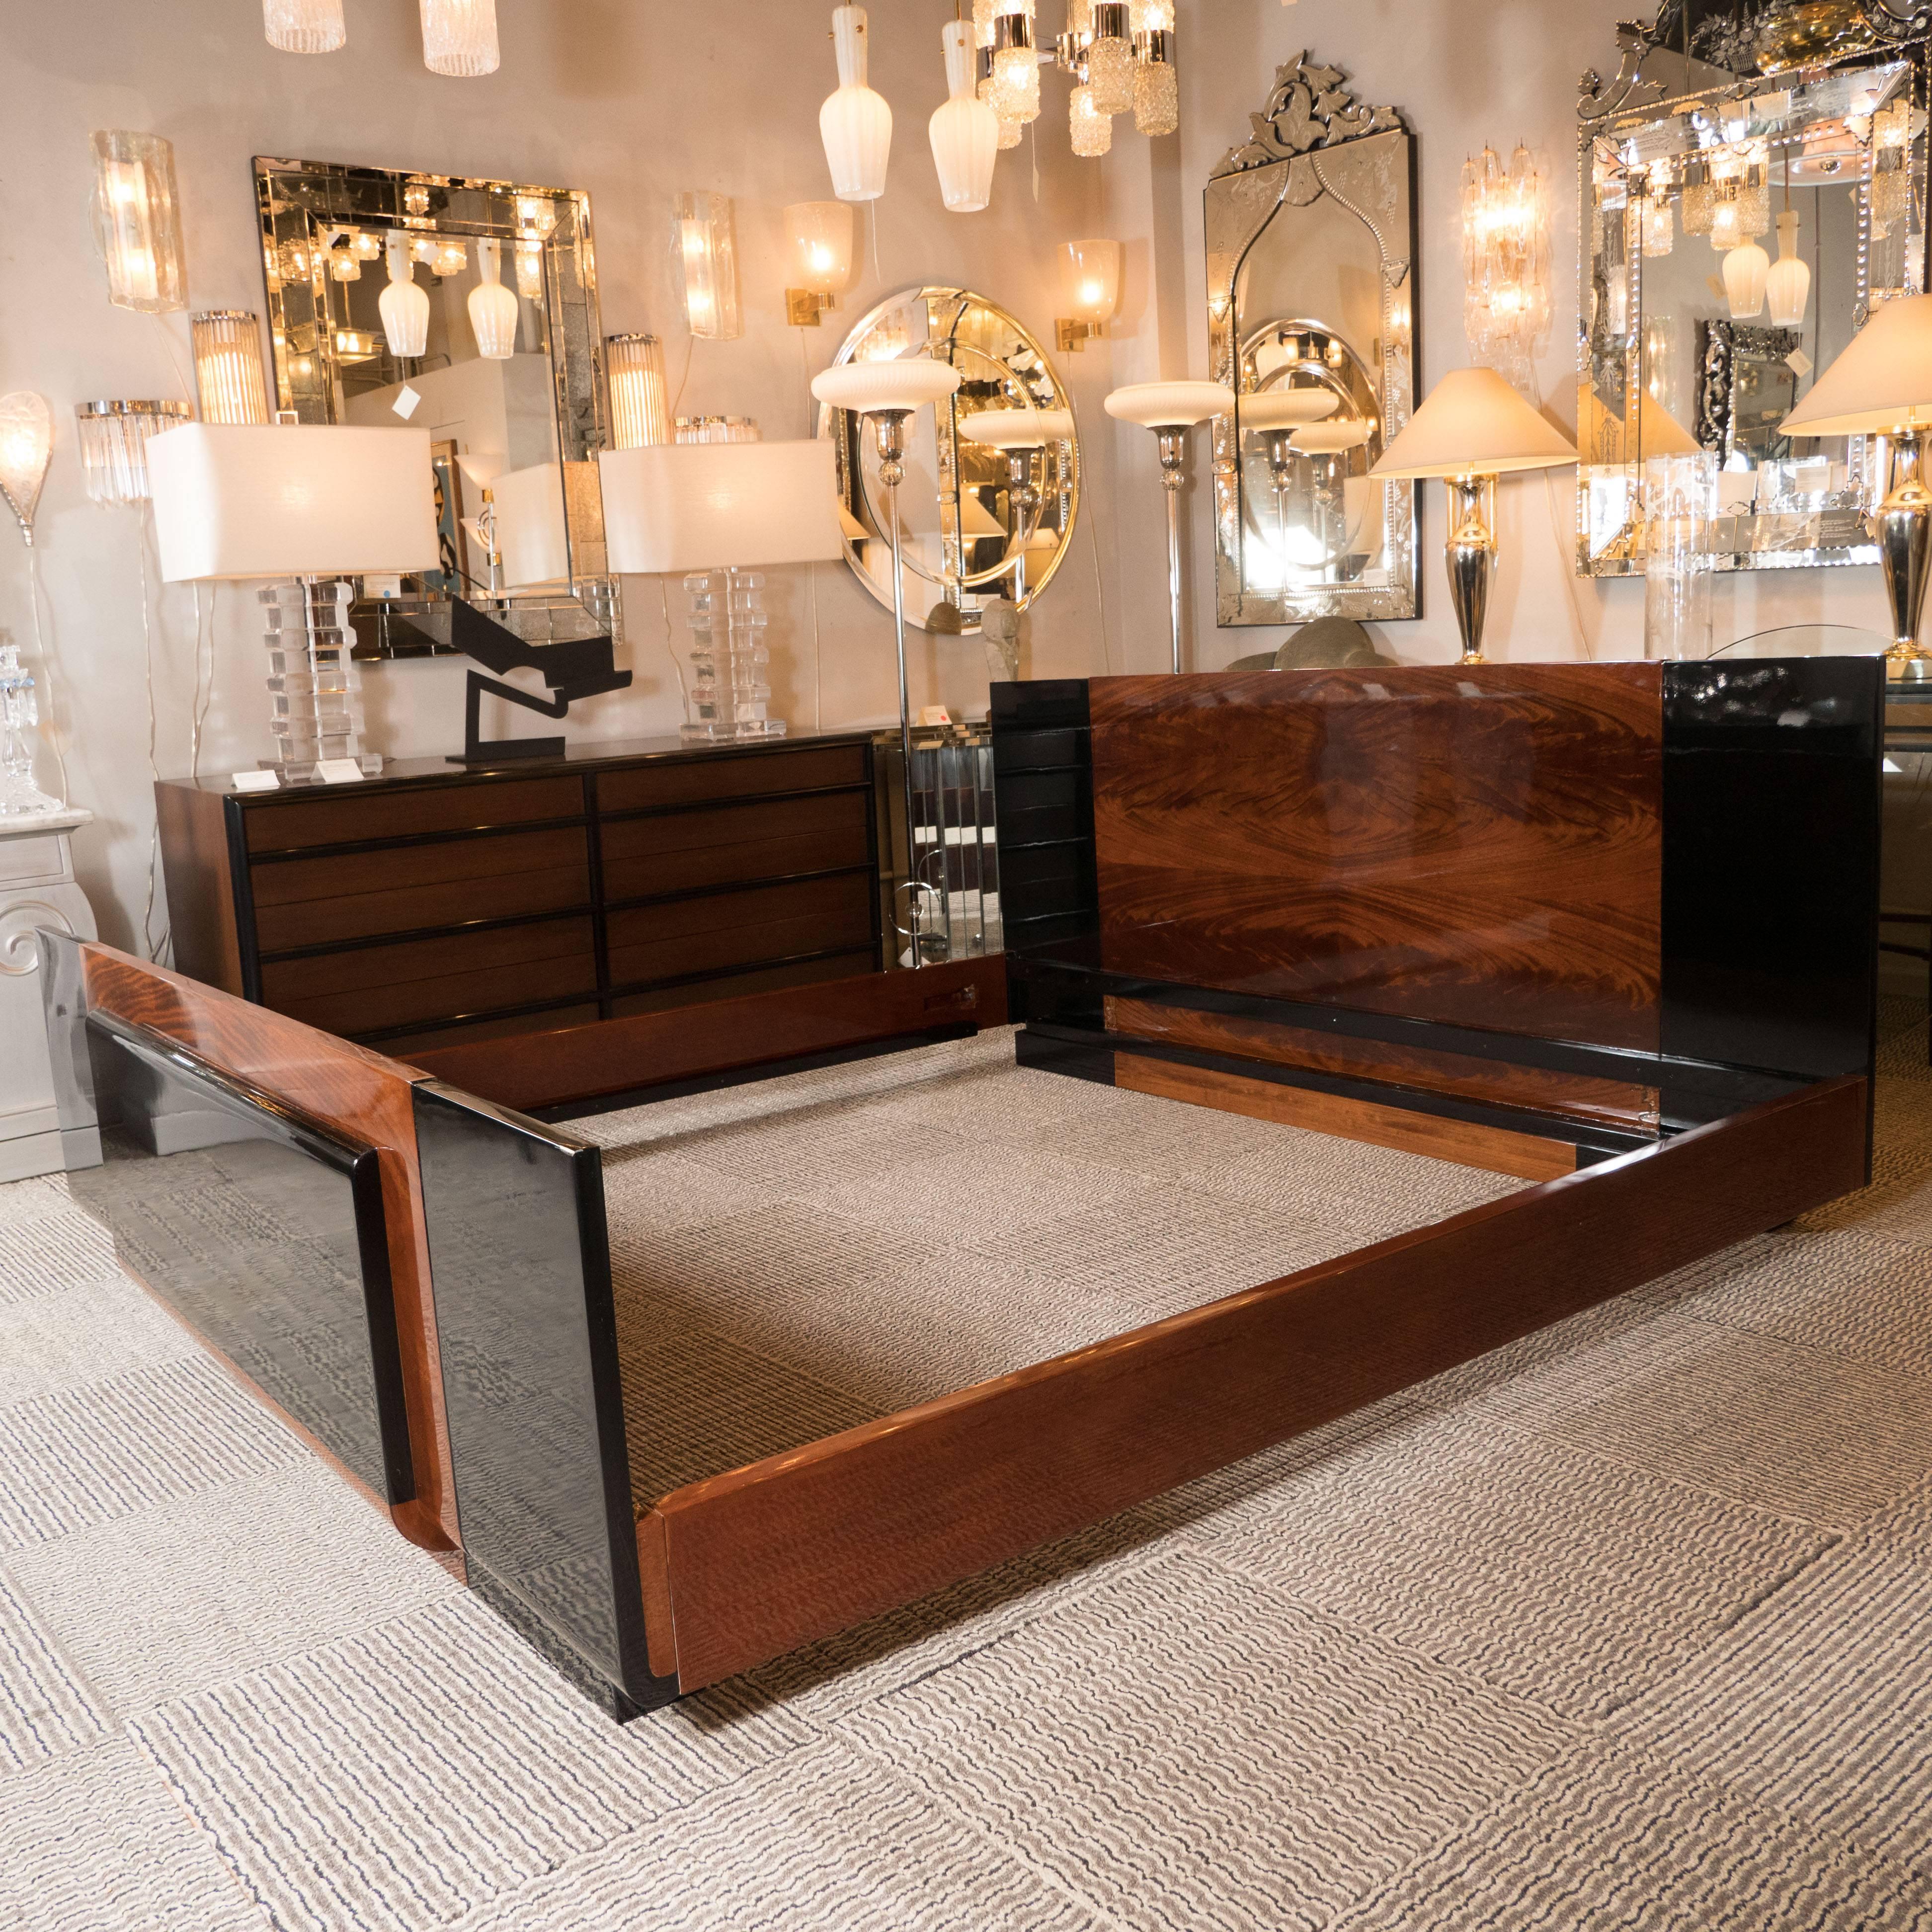 This rare and important Machine Age king-size bed set was realized by Donald Deskey- the fabled American designer behind Radio City Music Hall, circa 1935. It features bookmatched burled walnut interspersed with blocks of black lacquer. With its